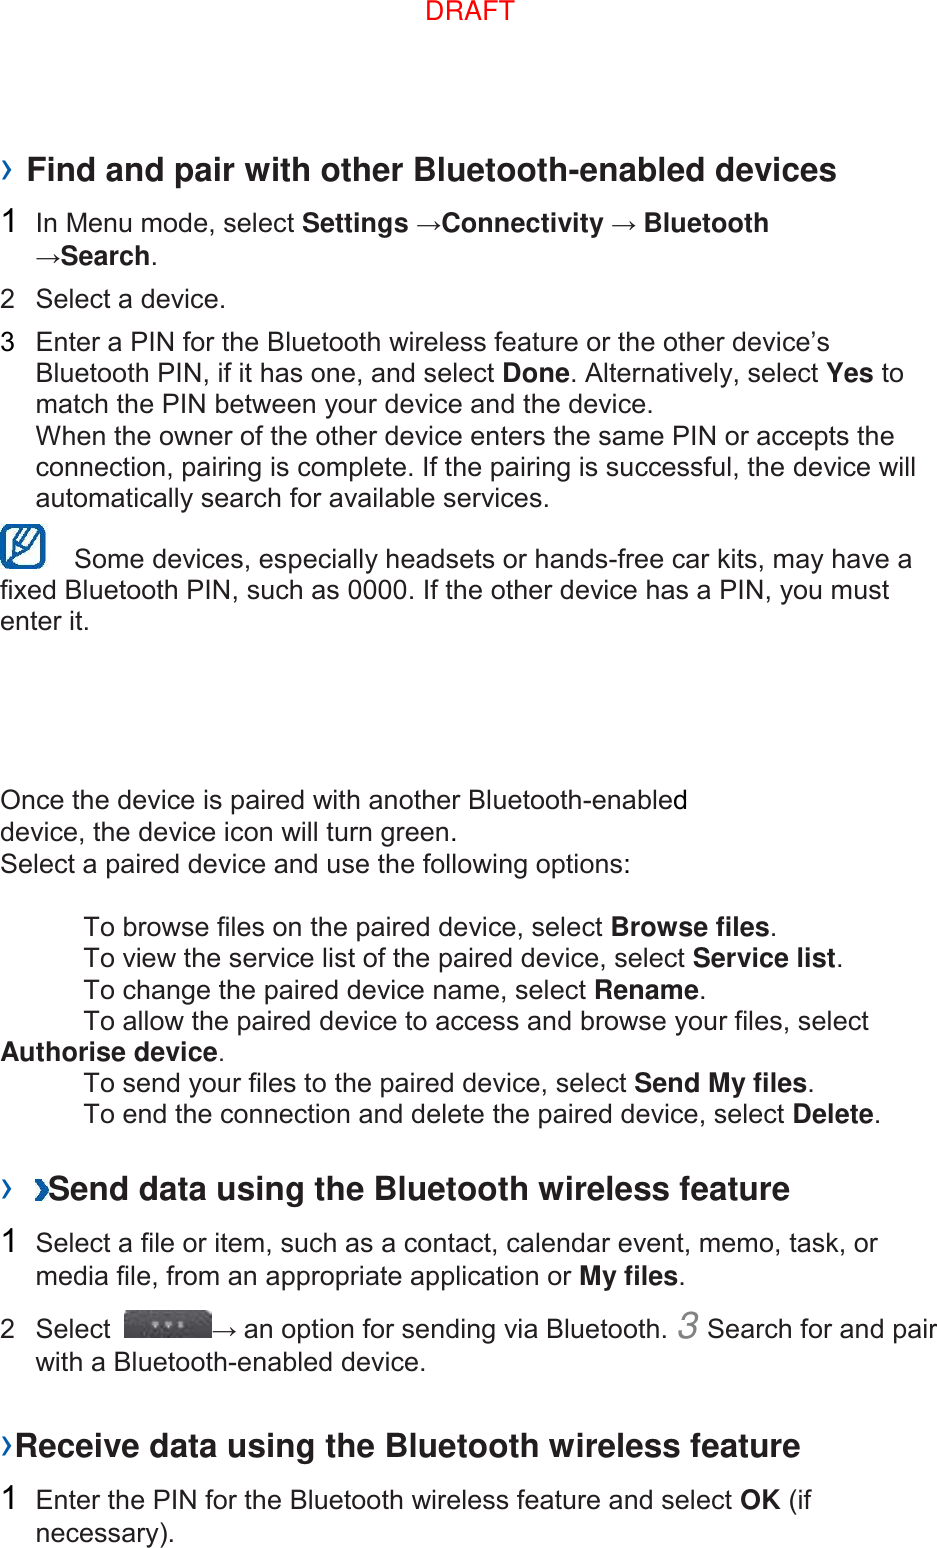 › Find and pair with other Bluetooth-enabled devices   1  In Menu mode, select Settings →Connectivity → Bluetooth →Search.   2  Select a device.   3  Enter a PIN for the Bluetooth wireless feature or the other device’s Bluetooth PIN, if it has one, and select Done. Alternatively, select Yes to match the PIN between your device and the device.   When the owner of the other device enters the same PIN or accepts the connection, pairing is complete. If the pairing is successful, the device will automatically search for available services.     Some devices, especially headsets or hands-free car kits, may have a fixed Bluetooth PIN, such as 0000. If the other device has a PIN, you must enter it.   Once the device is paired with another Bluetooth-enabled device, the device icon will turn green. Select a paired device and use the following options:    To browse files on the paired device, select Browse files.     To view the service list of the paired device, select Service list.     To change the paired device name, select Rename.    To allow the paired device to access and browse your files, select Authorise device.     To send your files to the paired device, select Send My files.     To end the connection and delete the paired device, select Delete.    ›  Send data using the Bluetooth wireless feature   1  Select a file or item, such as a contact, calendar event, memo, task, or media file, from an appropriate application or My files.   2  Select  → an option for sending via Bluetooth. 3 Search for and pair with a Bluetooth-enabled device.   ›Receive data using the Bluetooth wireless feature   1  Enter the PIN for the Bluetooth wireless feature and select OK (if necessary).   DRAFT